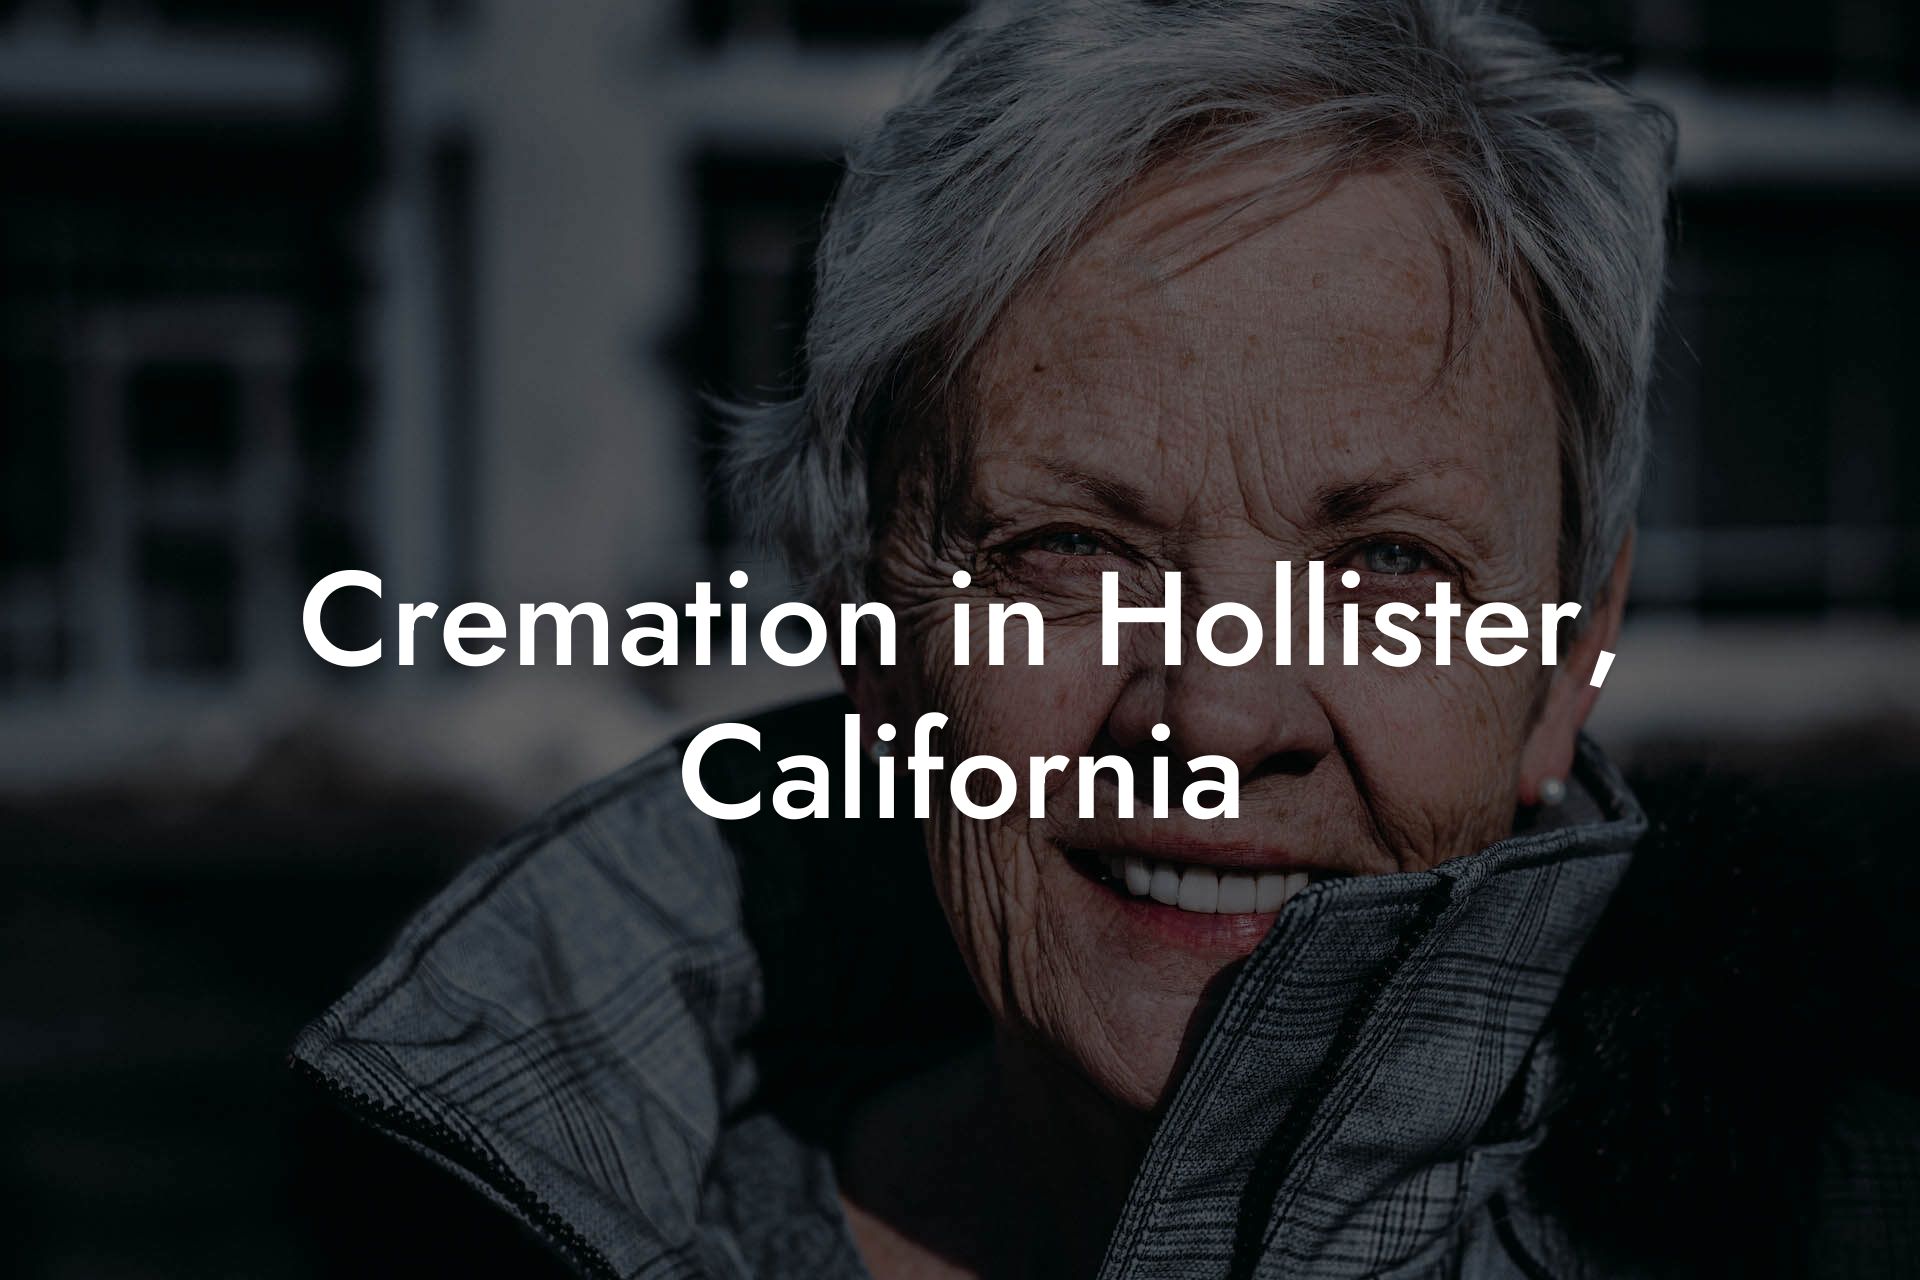 Cremation in Hollister, California